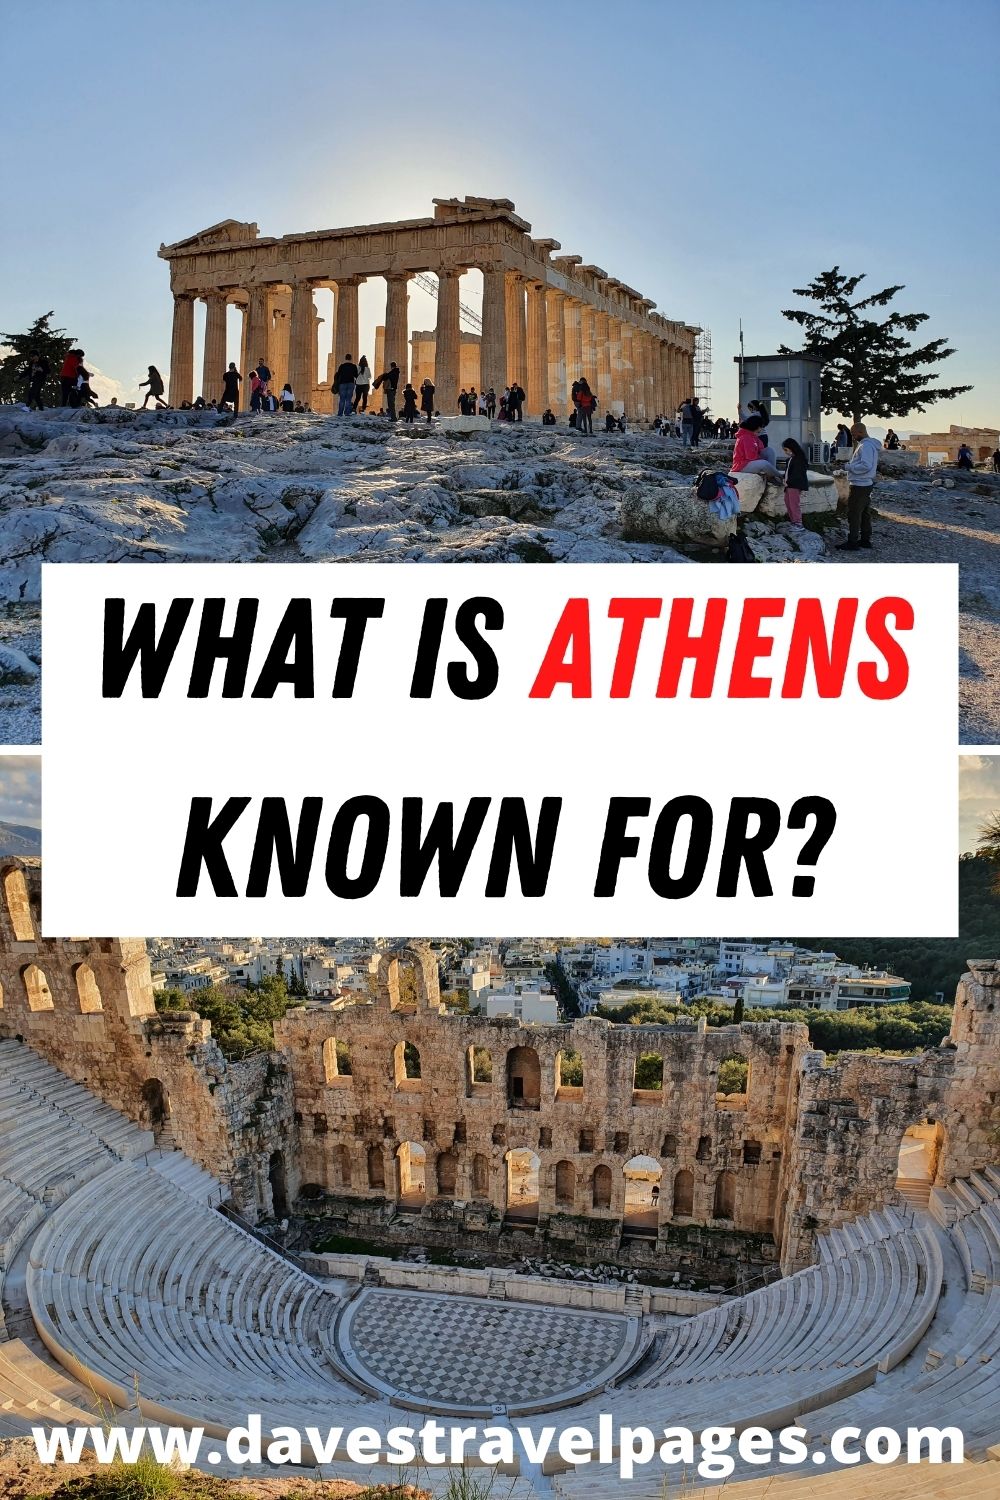 What was Athens known for